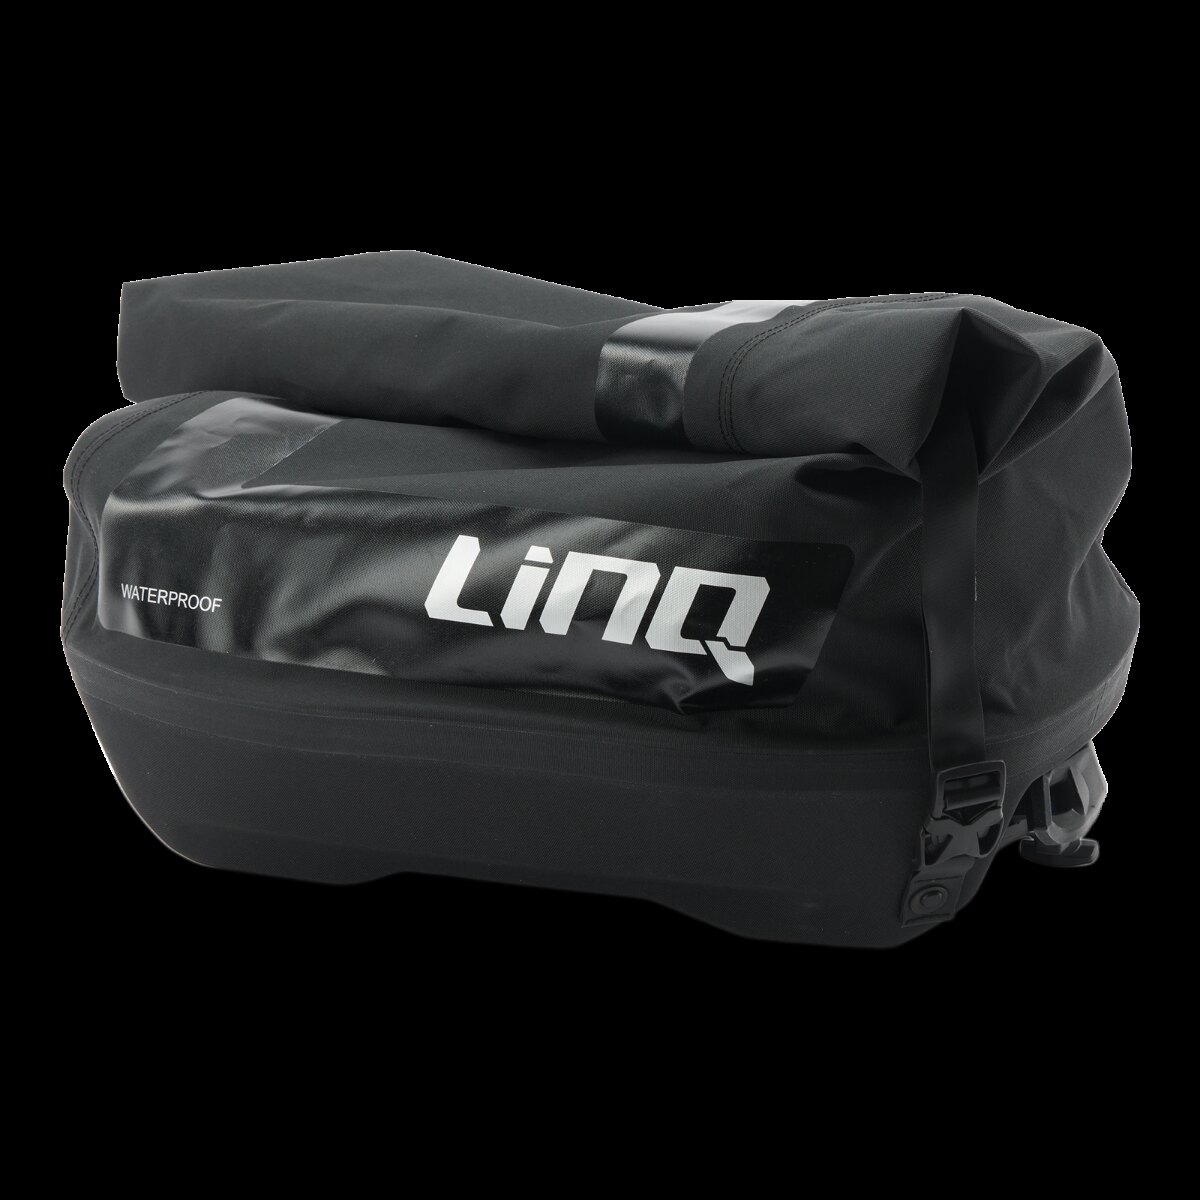 USE 715002875 FIRST LINQ DRY BAG 40L